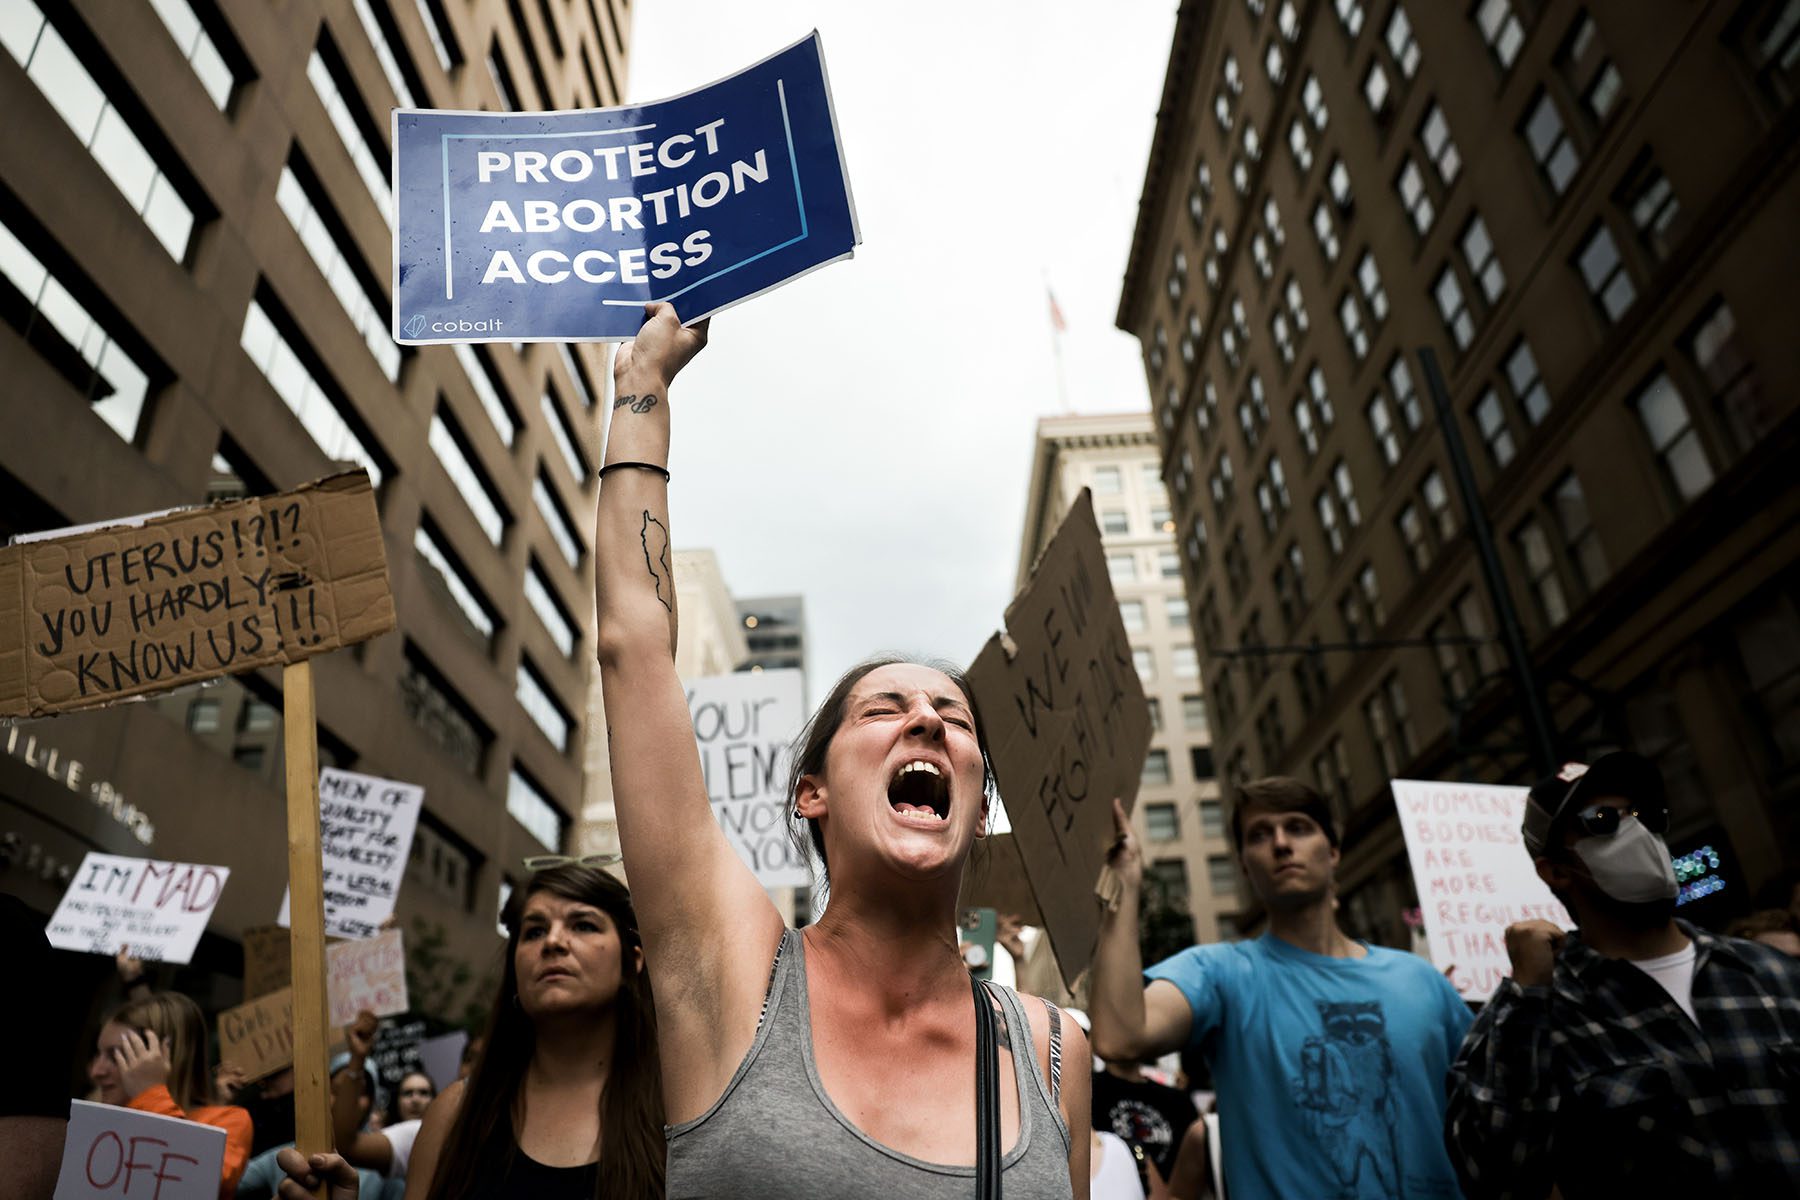 A demonstrator holds up a sign that reads "Protect Abortion Access" while chanting slogans during a protest.